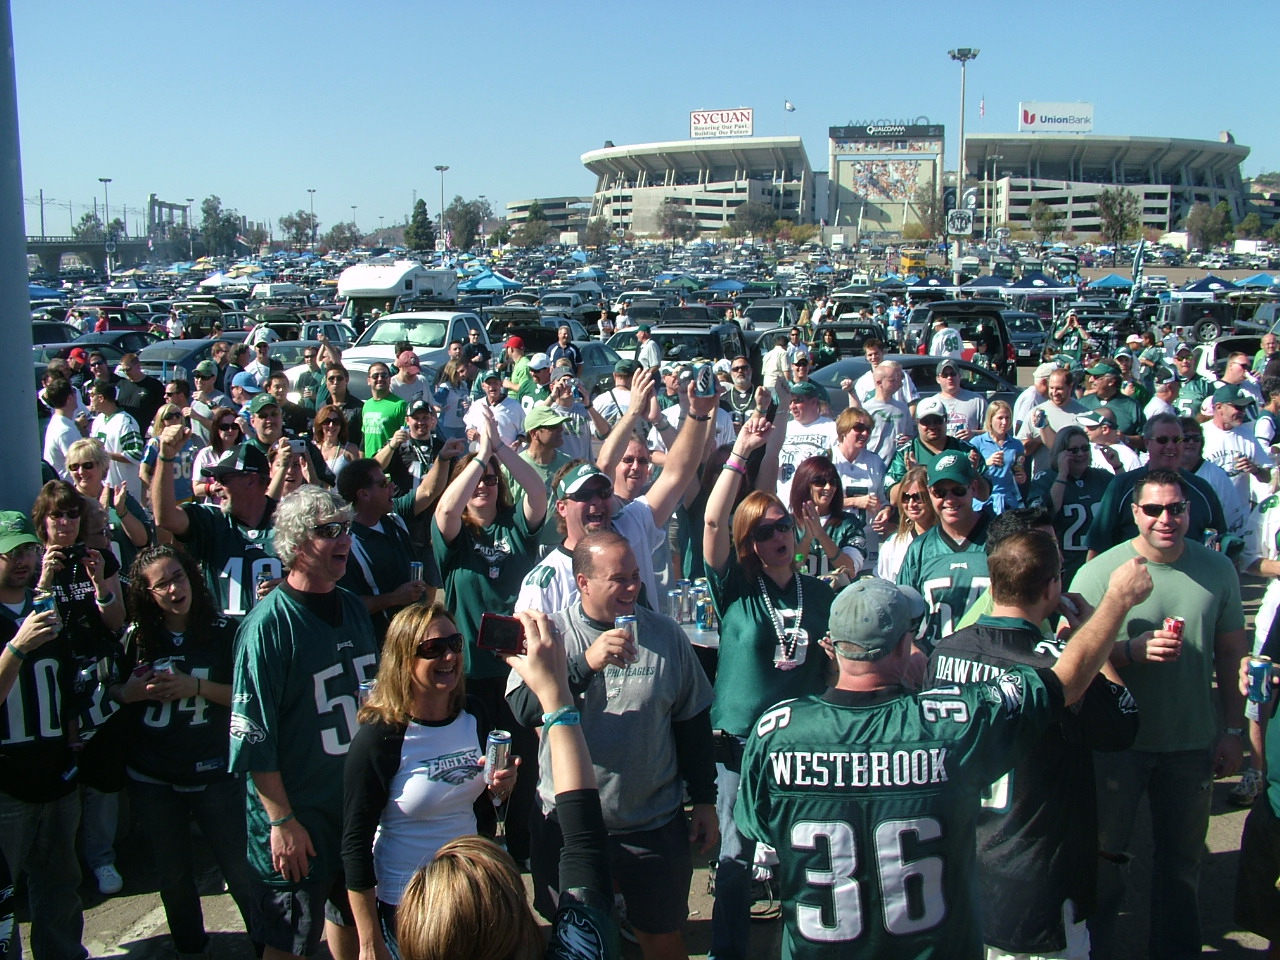 Eagles Tailgate Photo By onecrazyfan.com